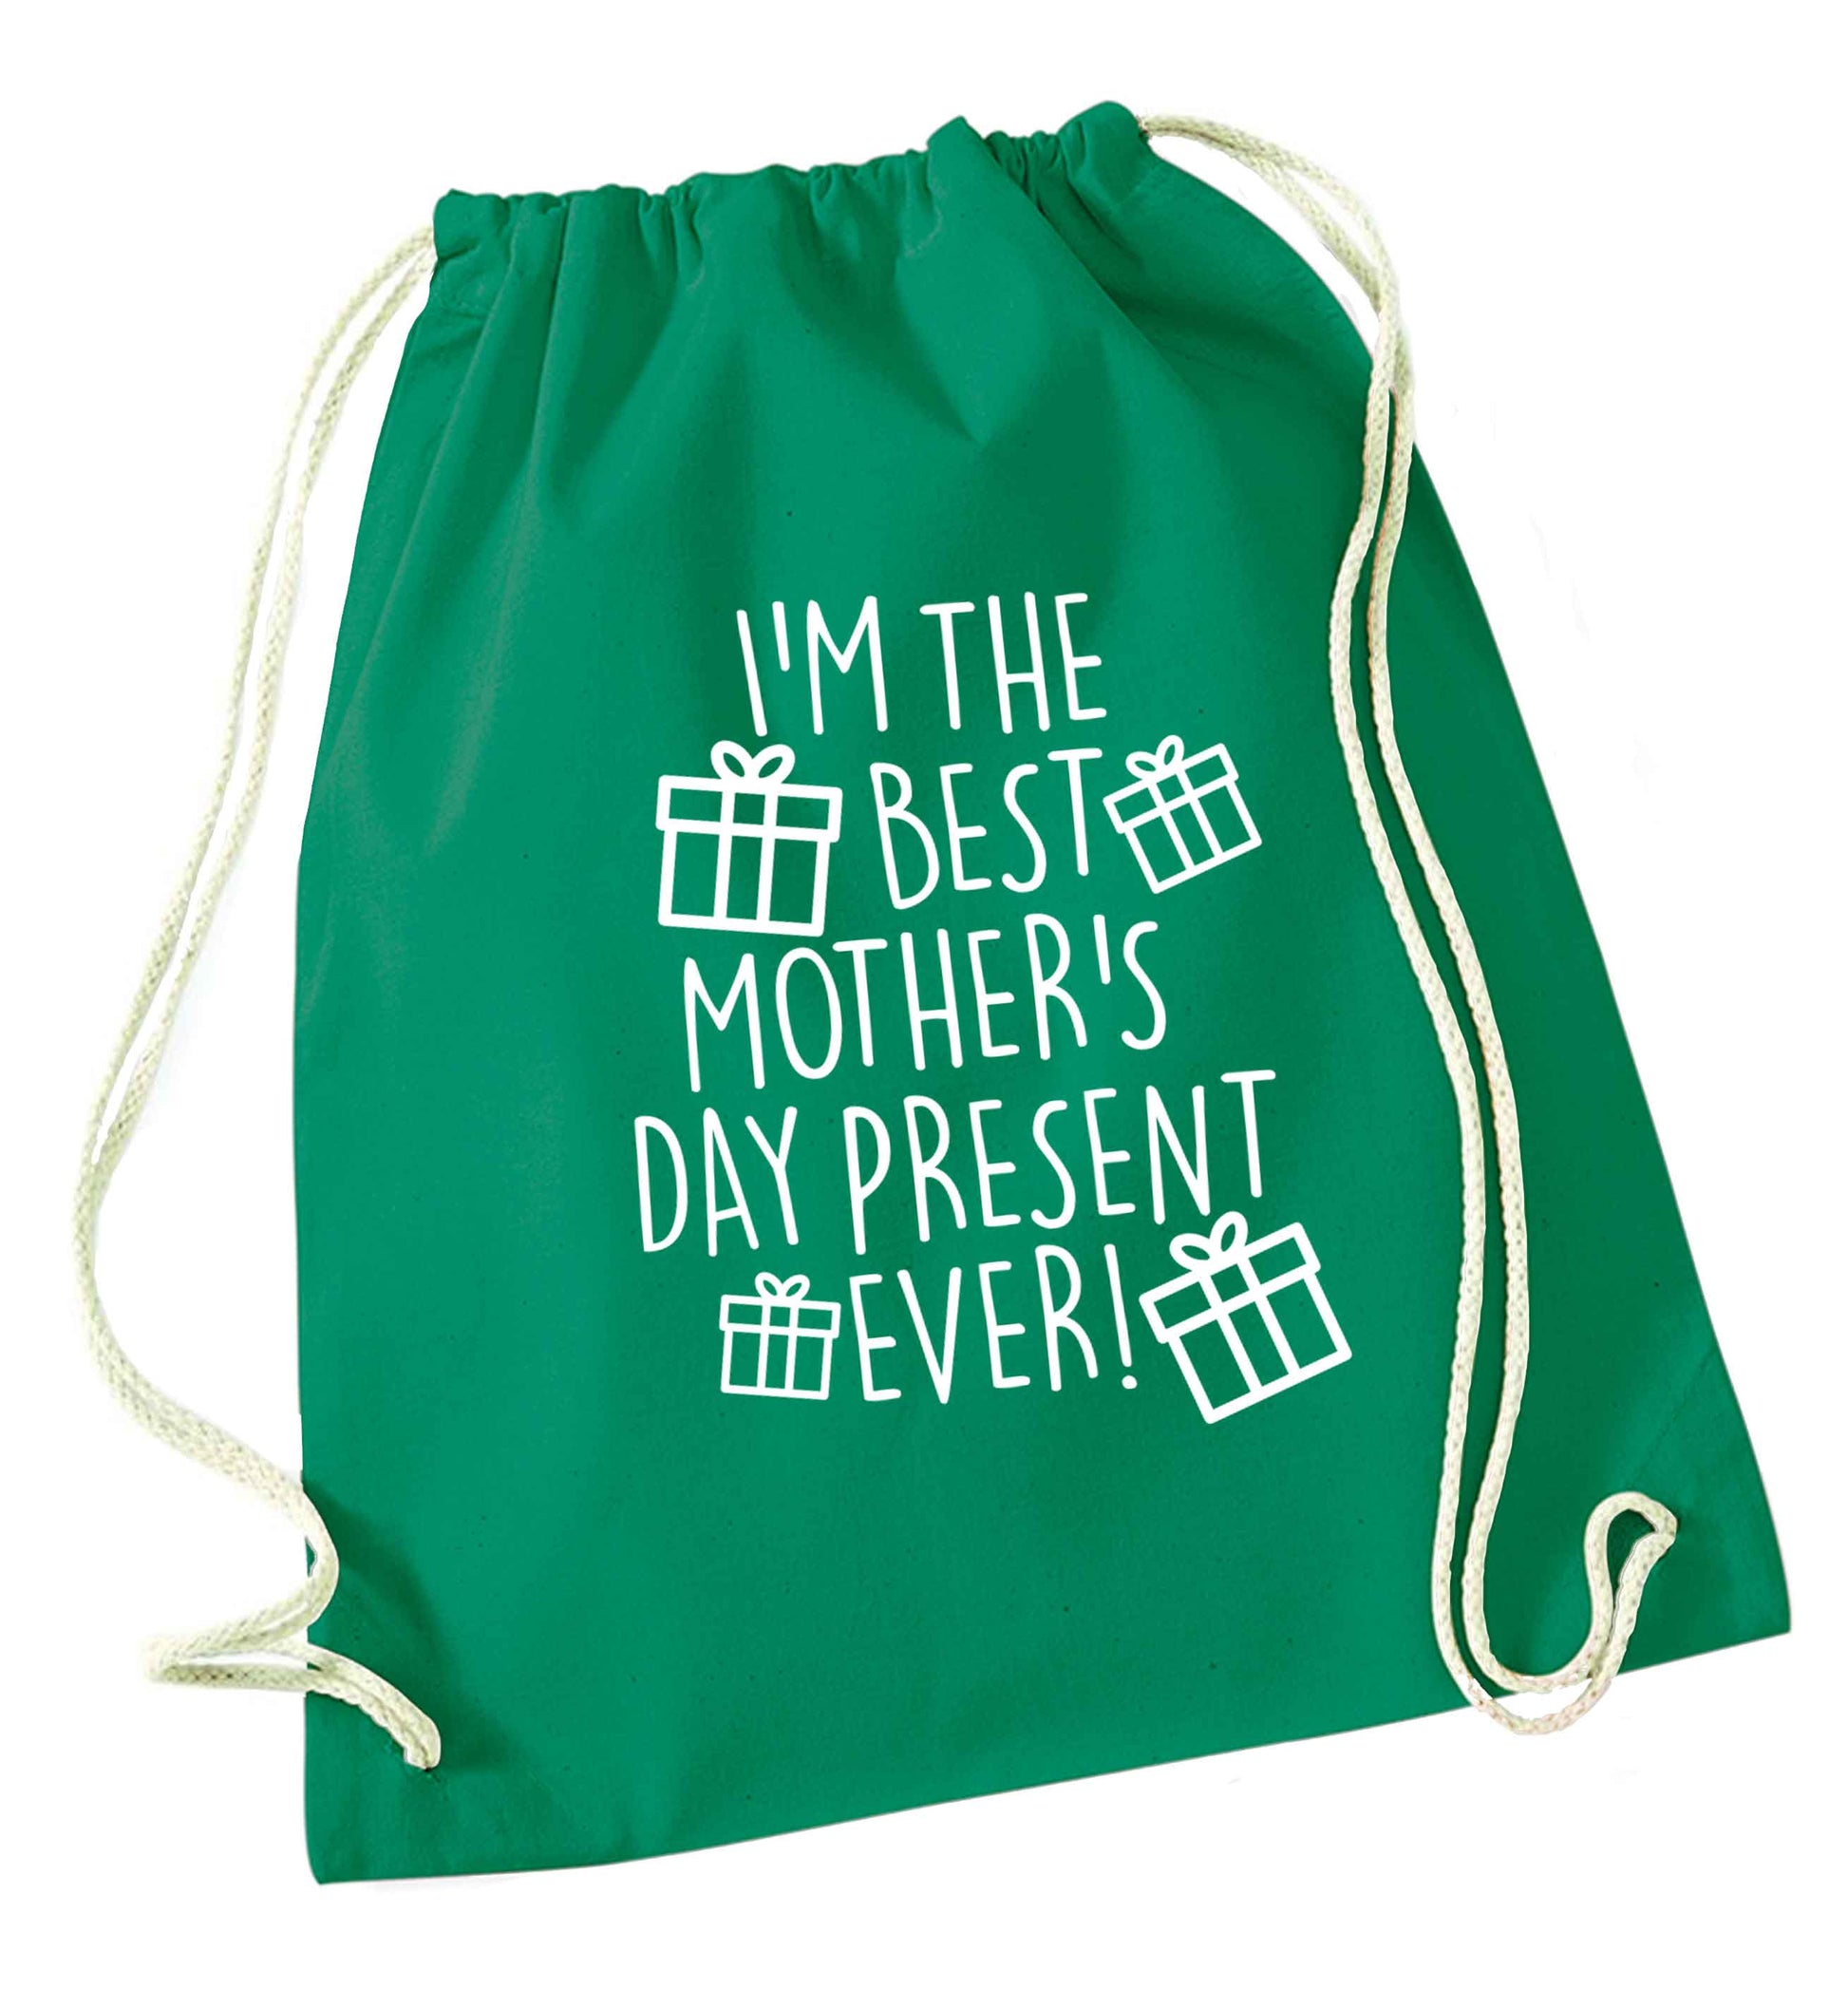 I'm the best mother's day present ever! green drawstring bag